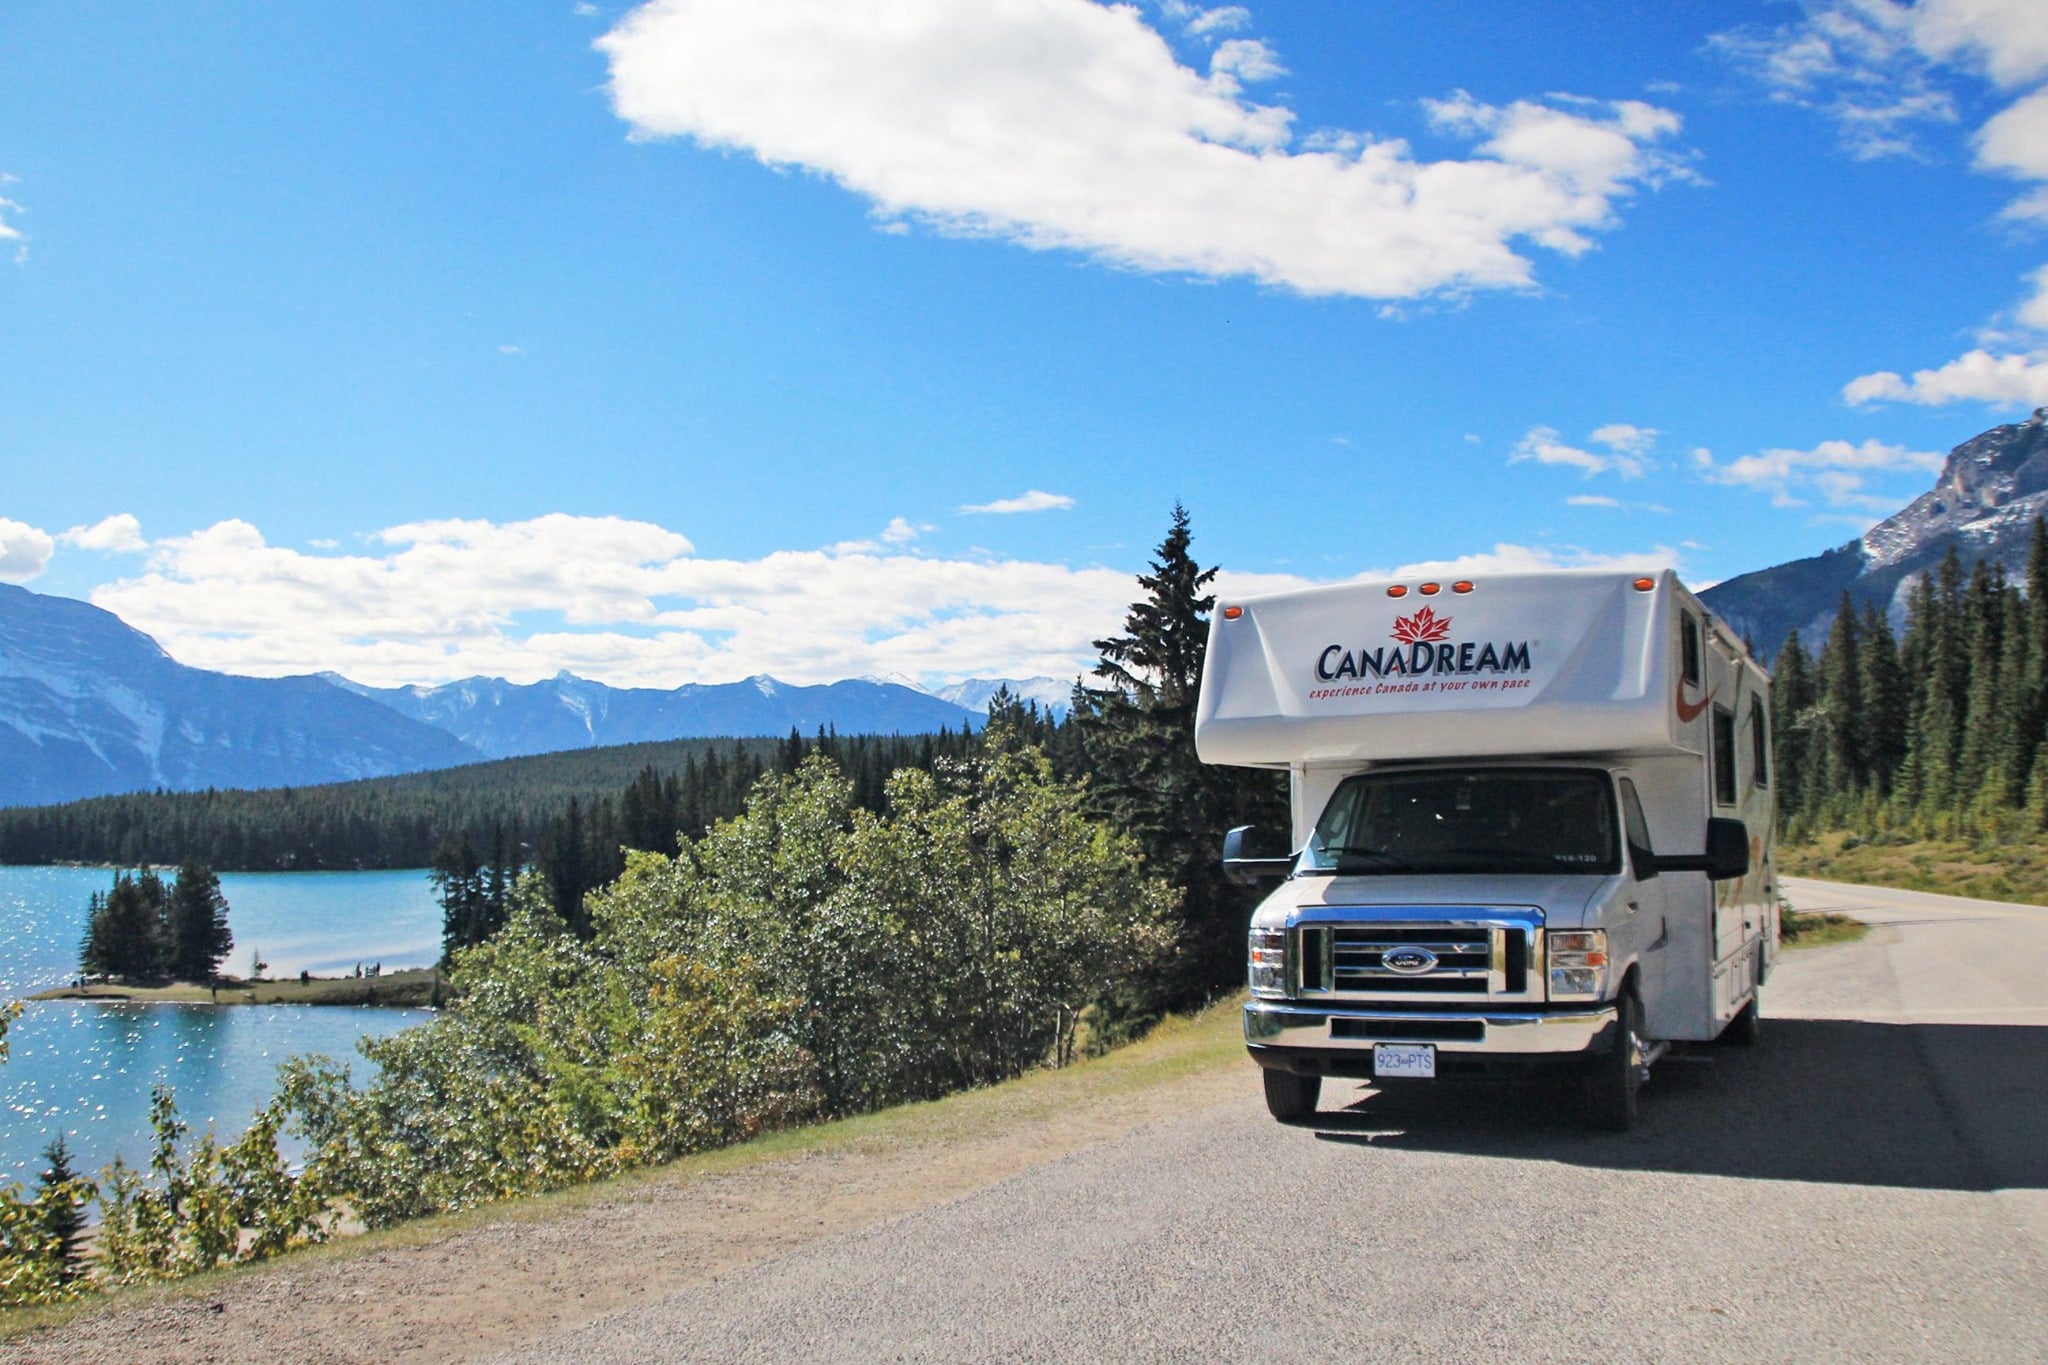 Canadream motorhome exploring the lakes of Canada